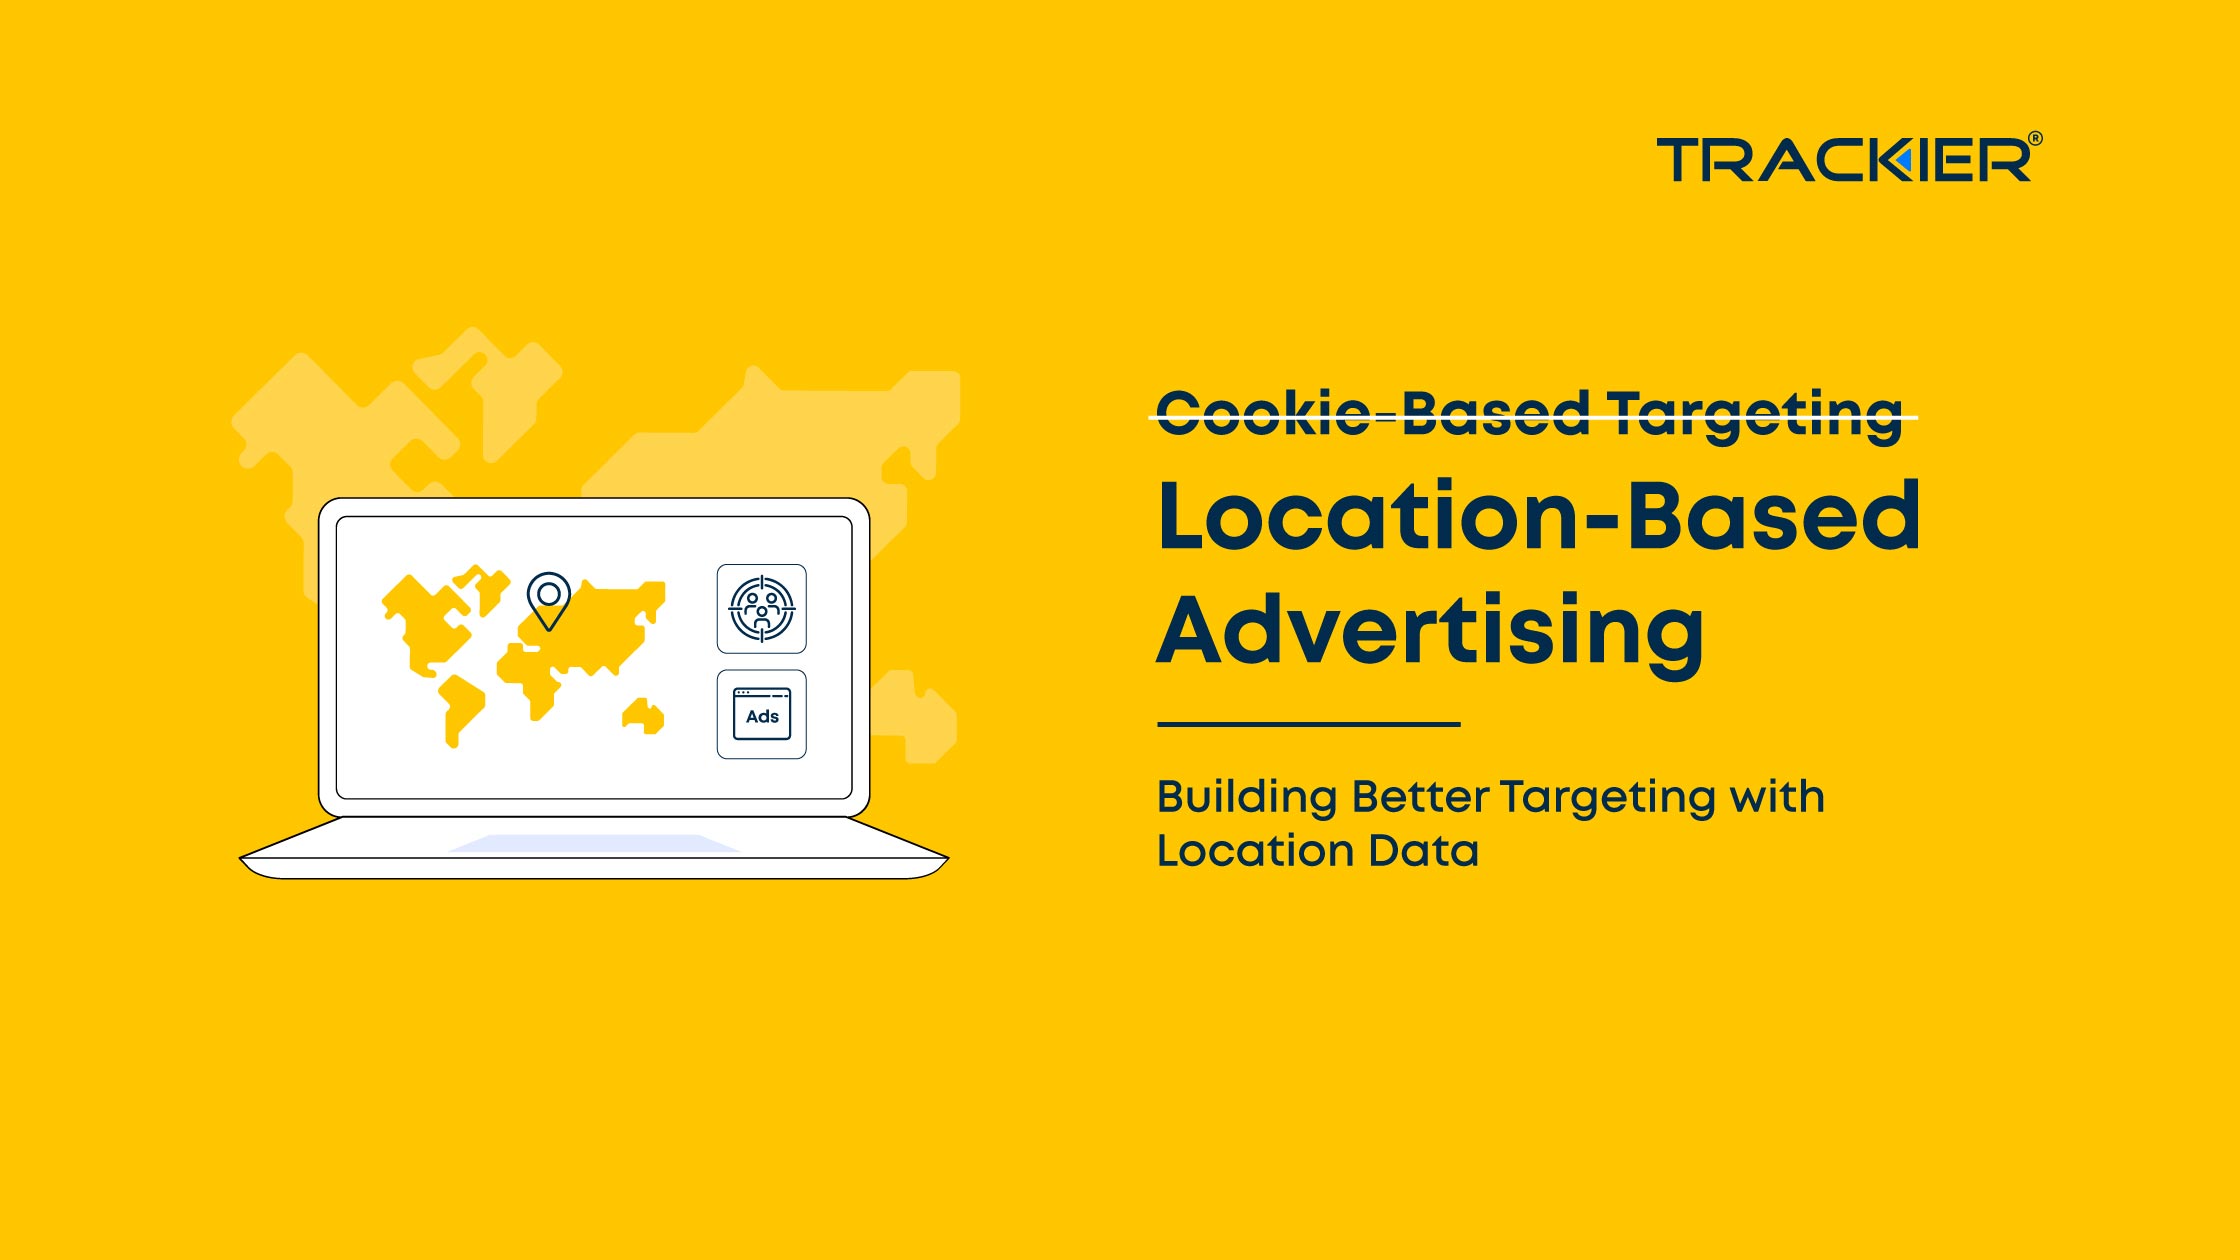 Beyond The Cookies: Finding Flavor in Location-Based Advertising